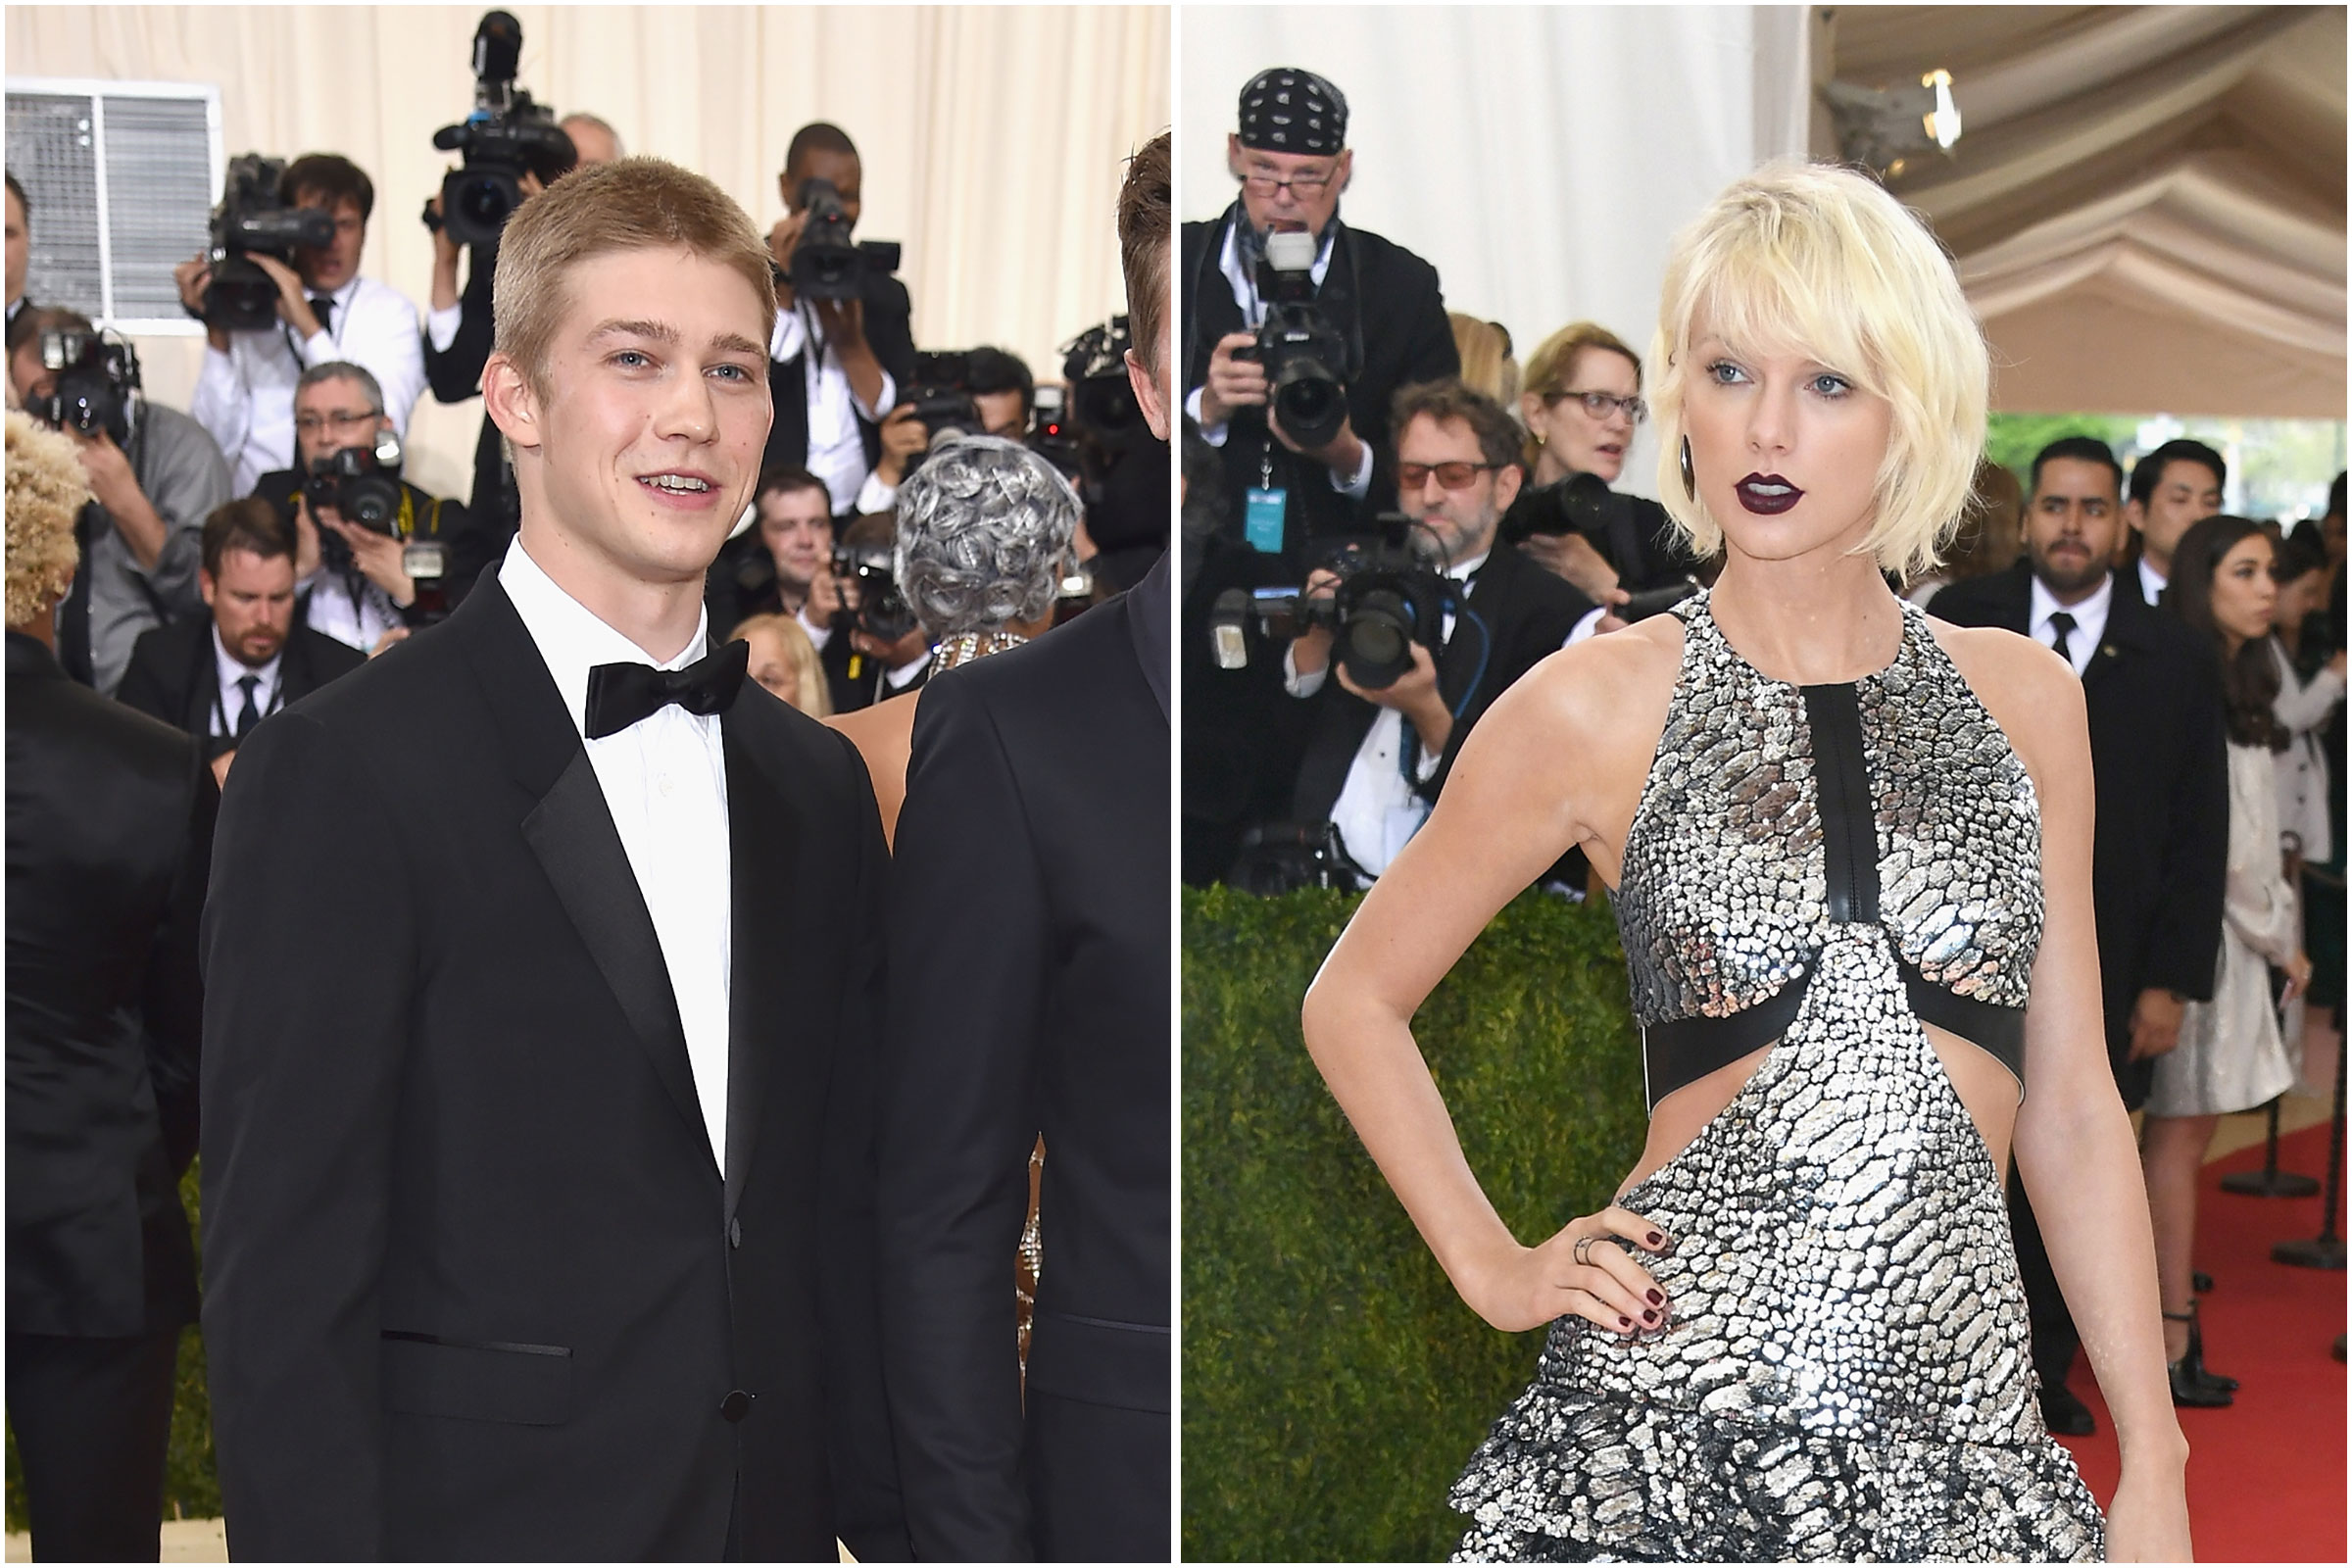 Joe Alwyn and Taylor Swift at the 2016 Met Gala (Dimitrios Kambouris—Getty Images; Larry Busacca—Getty Images)